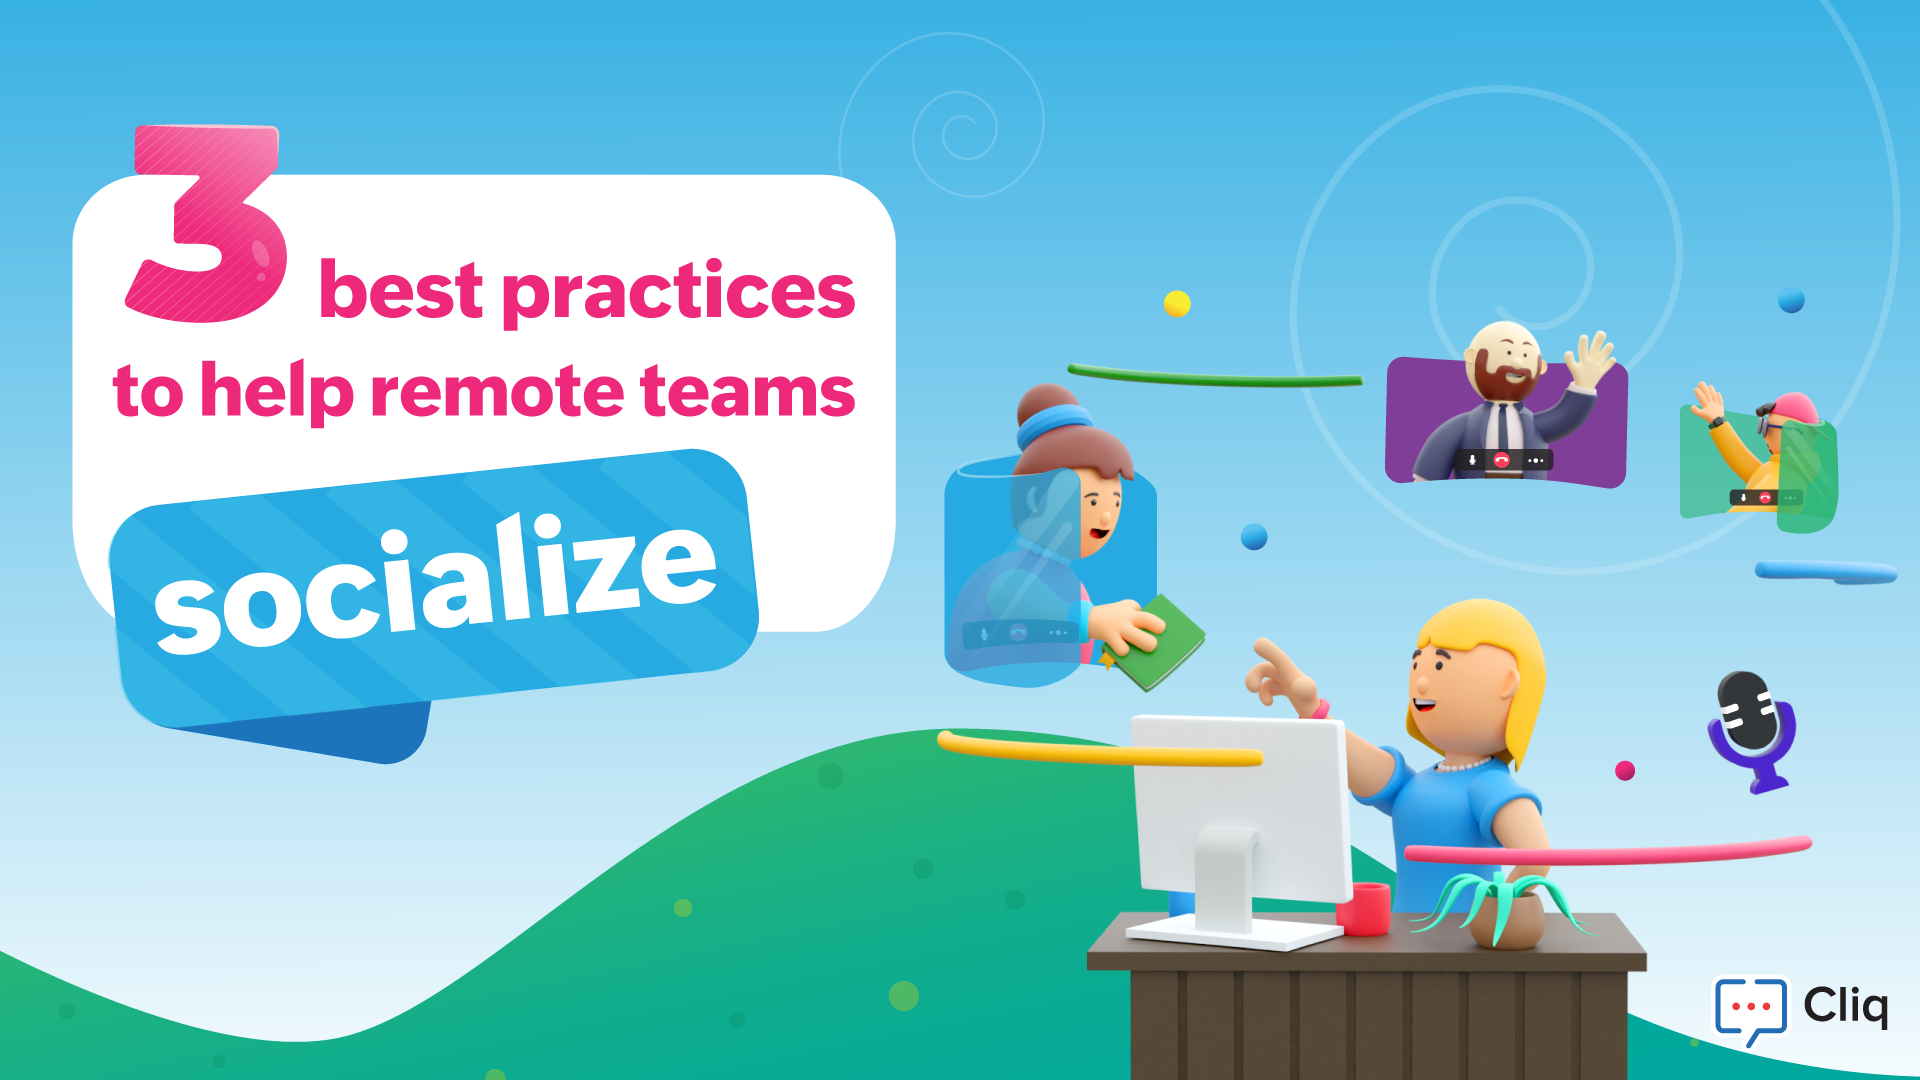 3 best practices to help remote teams socialize